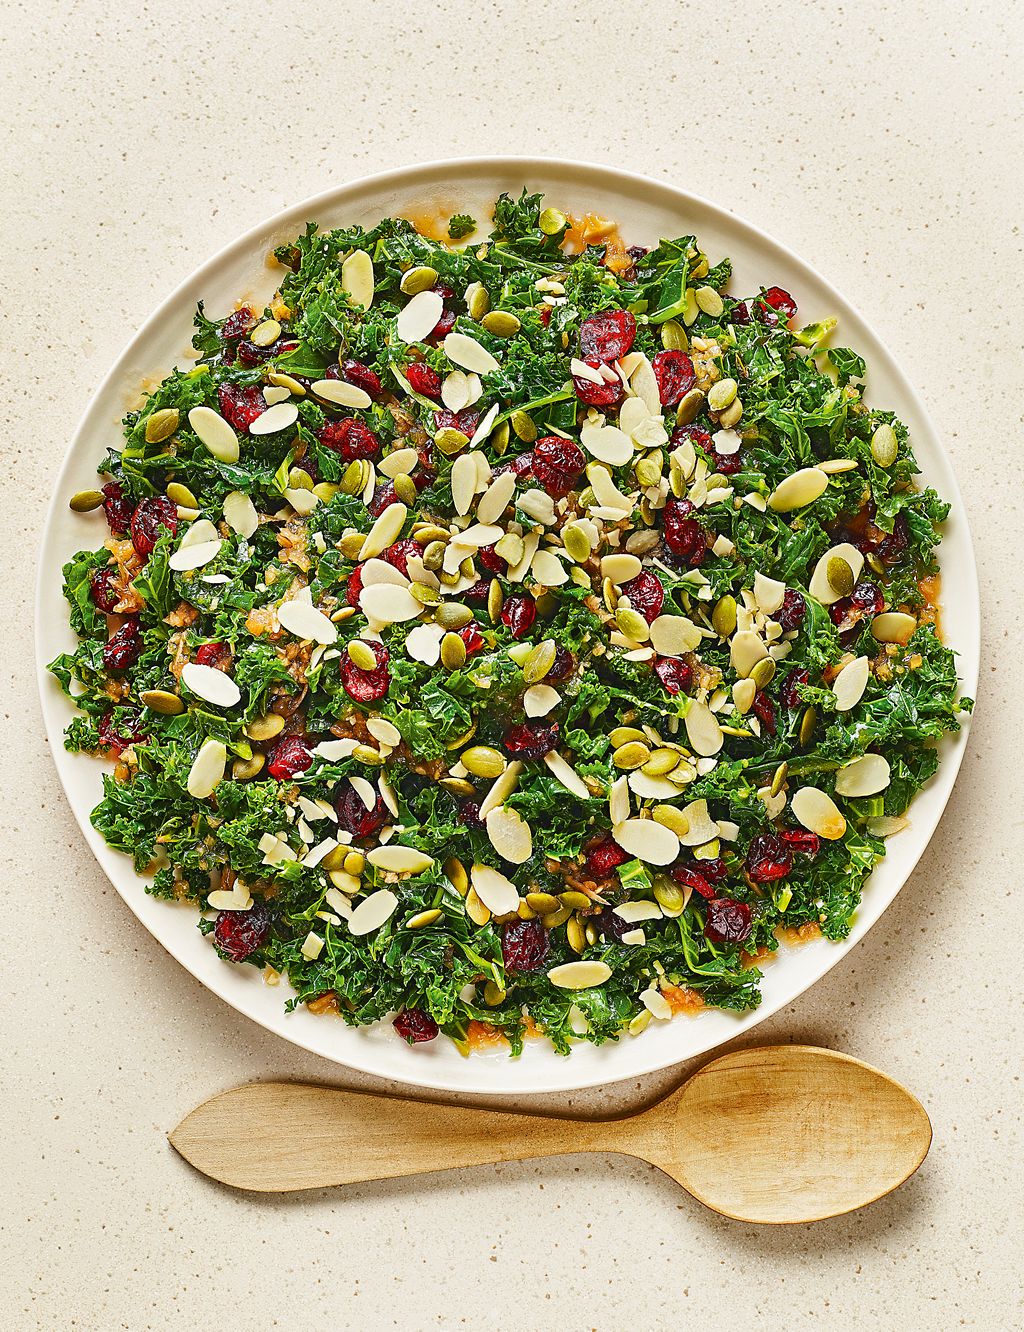 From The Deli Shredded Kale & Cranberry Salad with an Orange & Ginger Dressing (Serves 6) 3 of 3